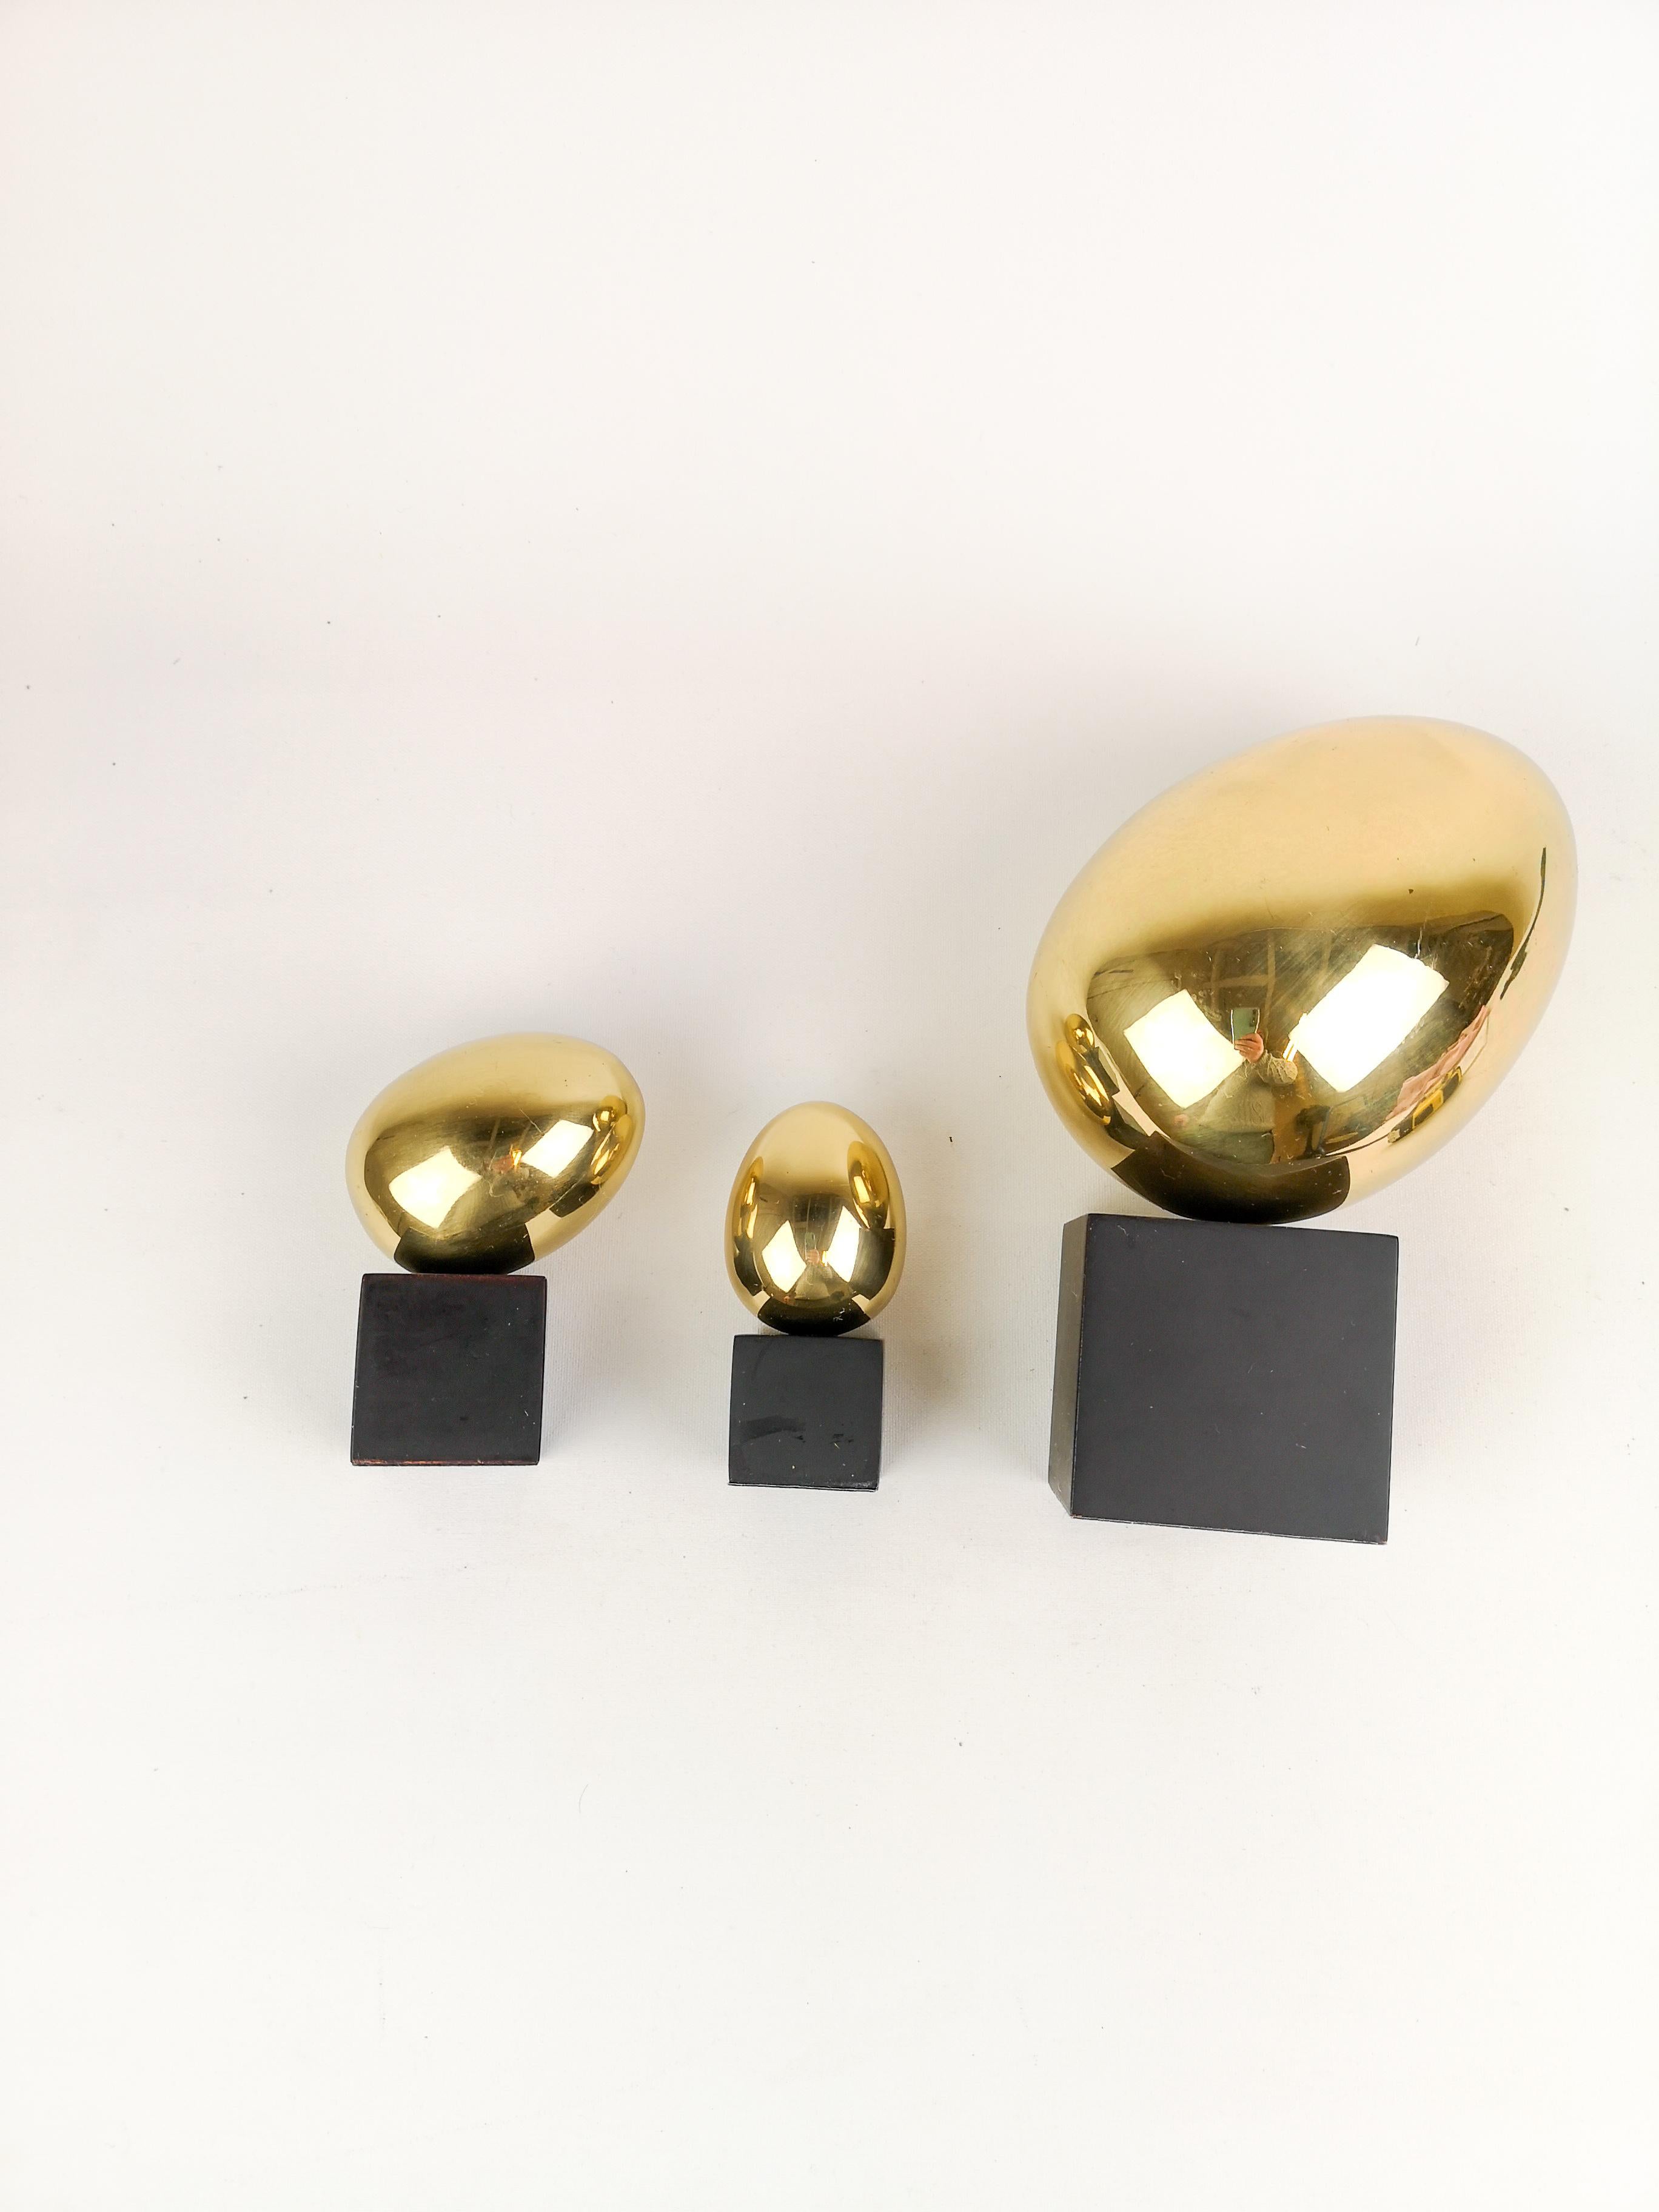 Late 20th Century Set of 3 Egg Sculptures in Polished Brass